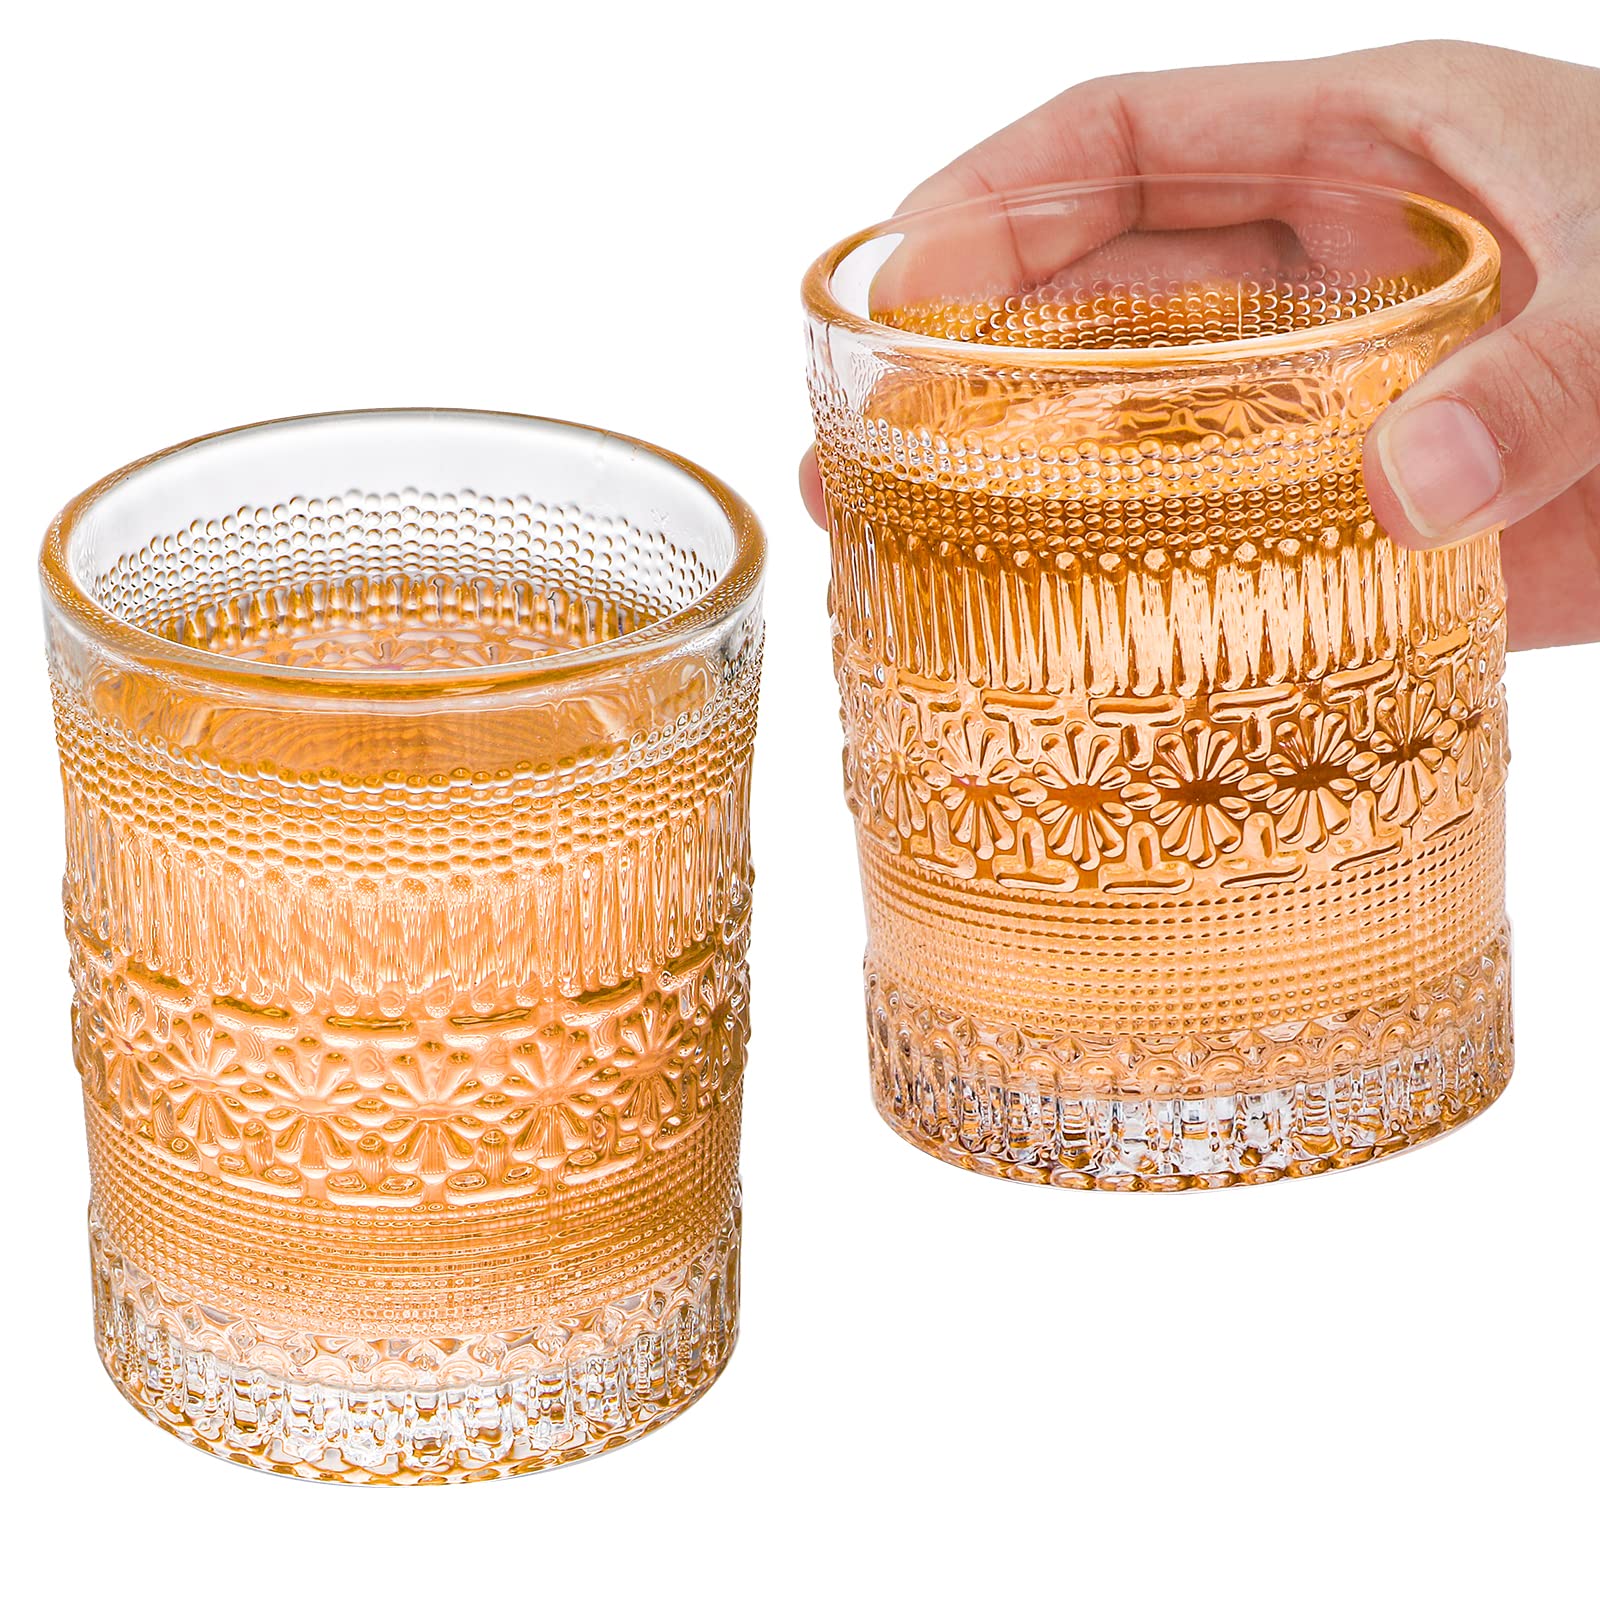 Coloch 6 Pack 11 Oz Romanstic Drinking Glasses, Embossed Water Glasses Vintage Heavy Base Whiskey Glasses Clear Glass Tumblers for Juice, Beverages, Cocktail, Coffee, Bar, Restaurant, Kitchen